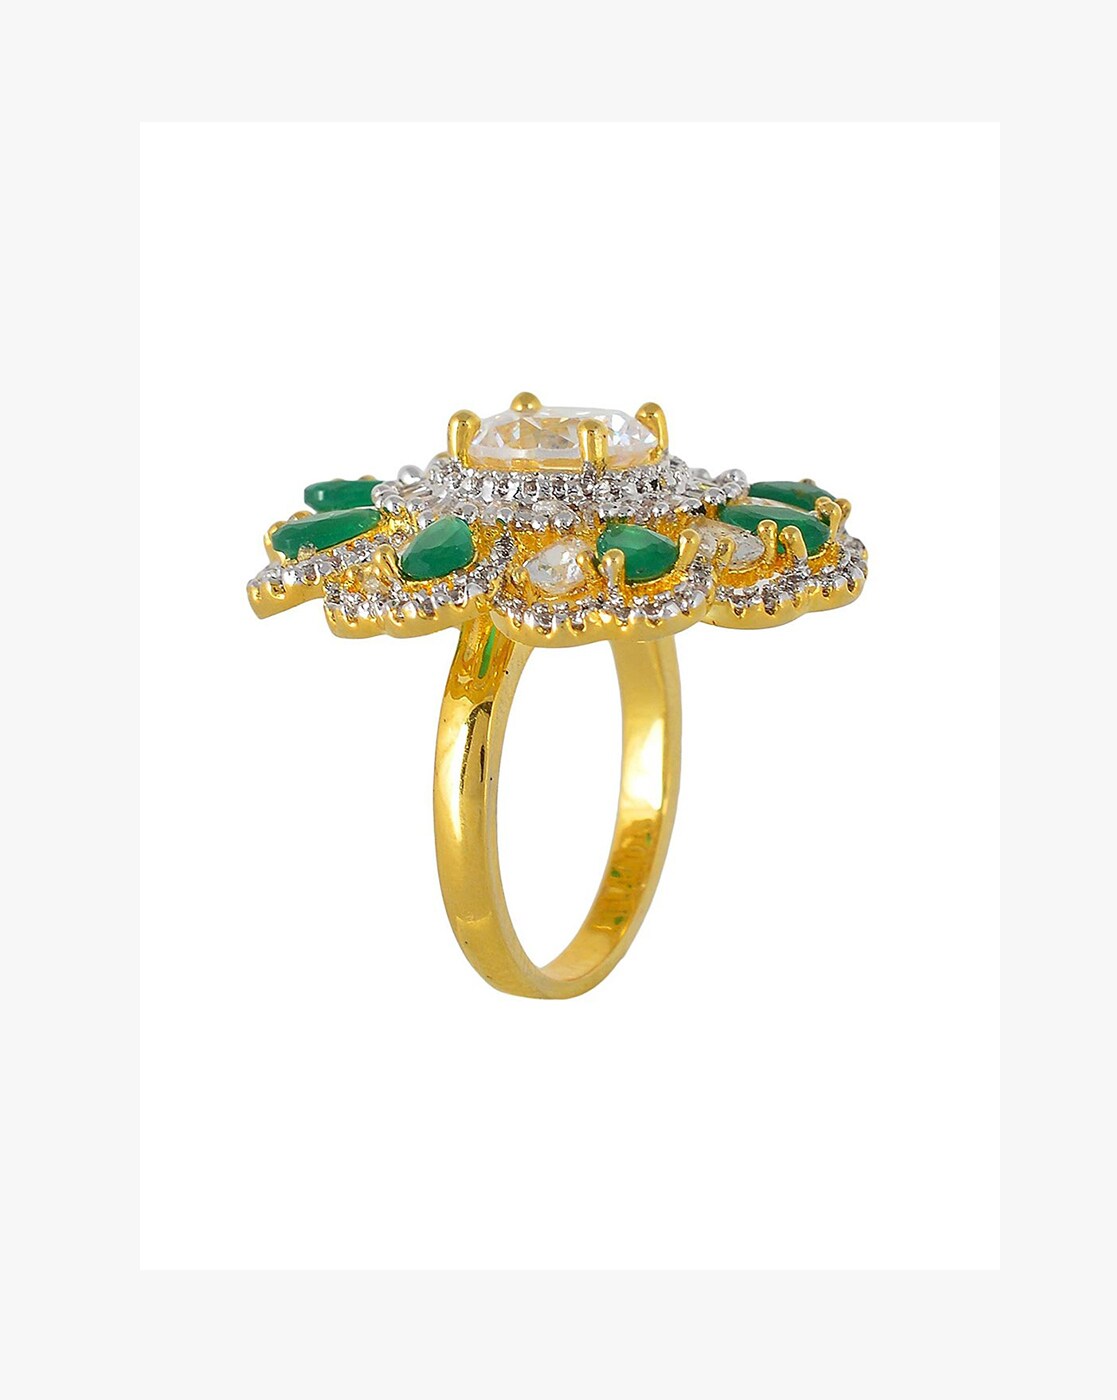 Emerald Ring 0.38 Ct. 18K Yellow Gold | The Natural Emerald Company